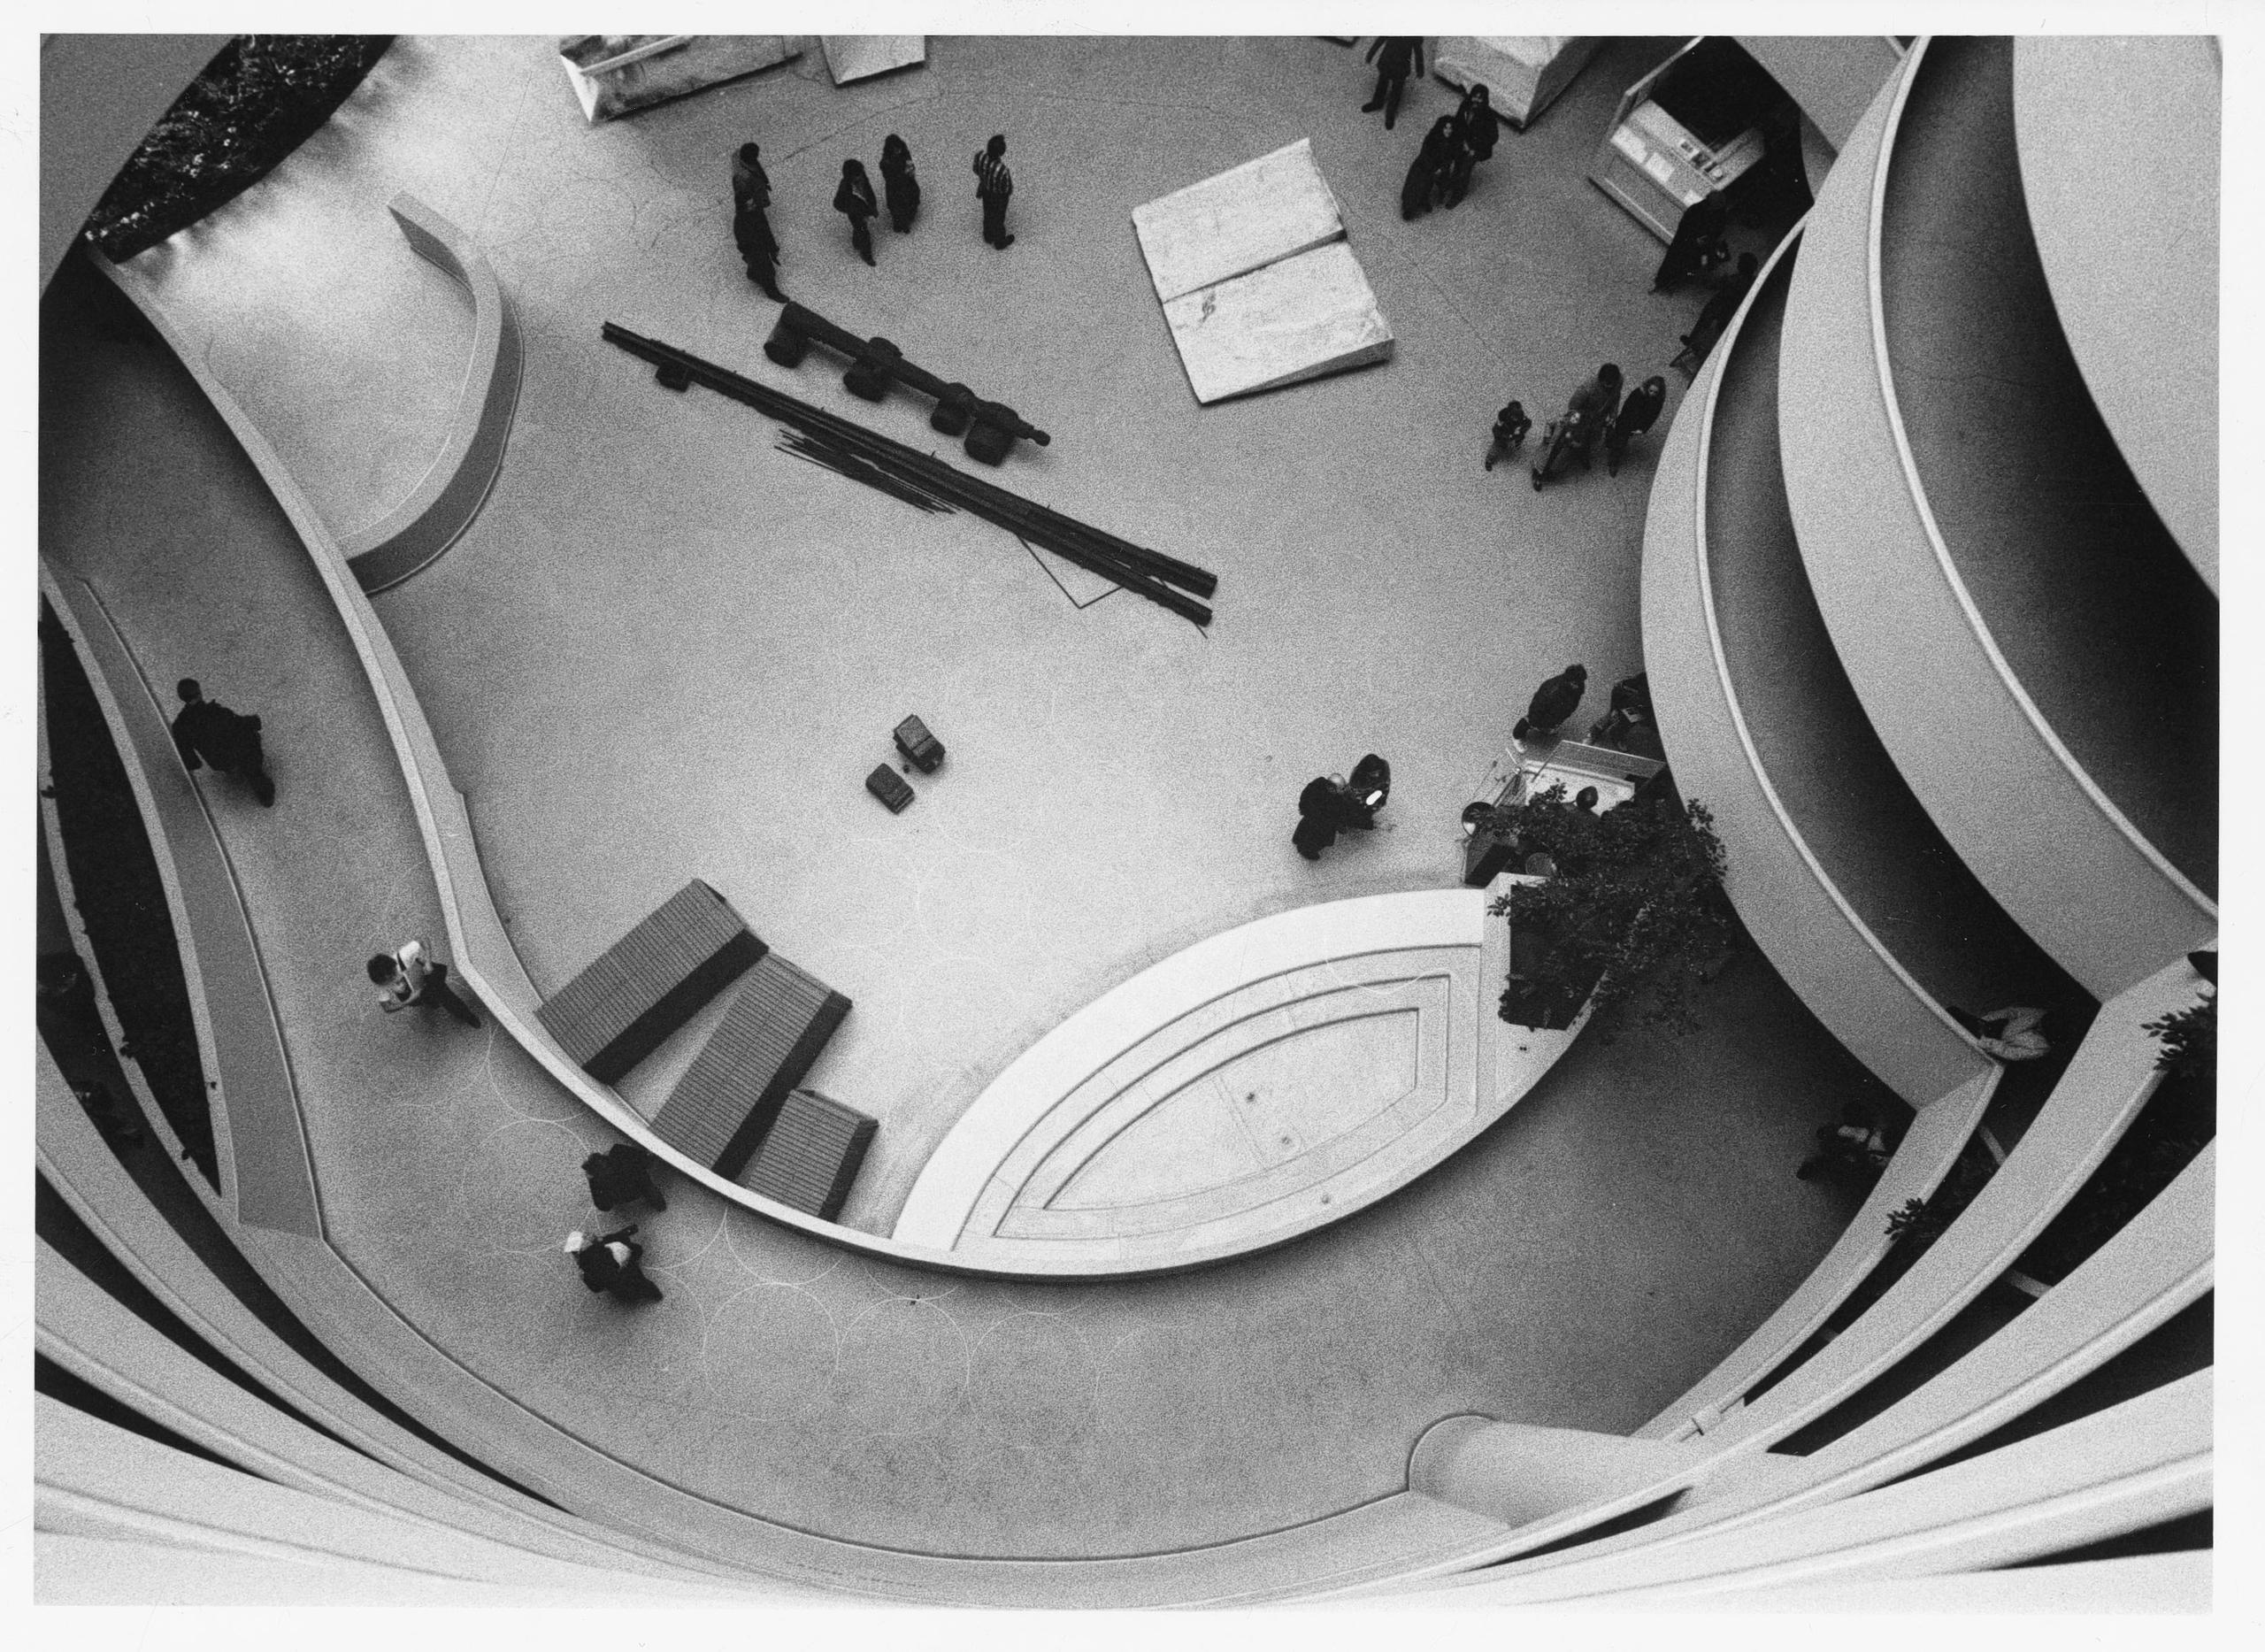 Inside Beuys exhibition in the Guggenheim, New York, 1979